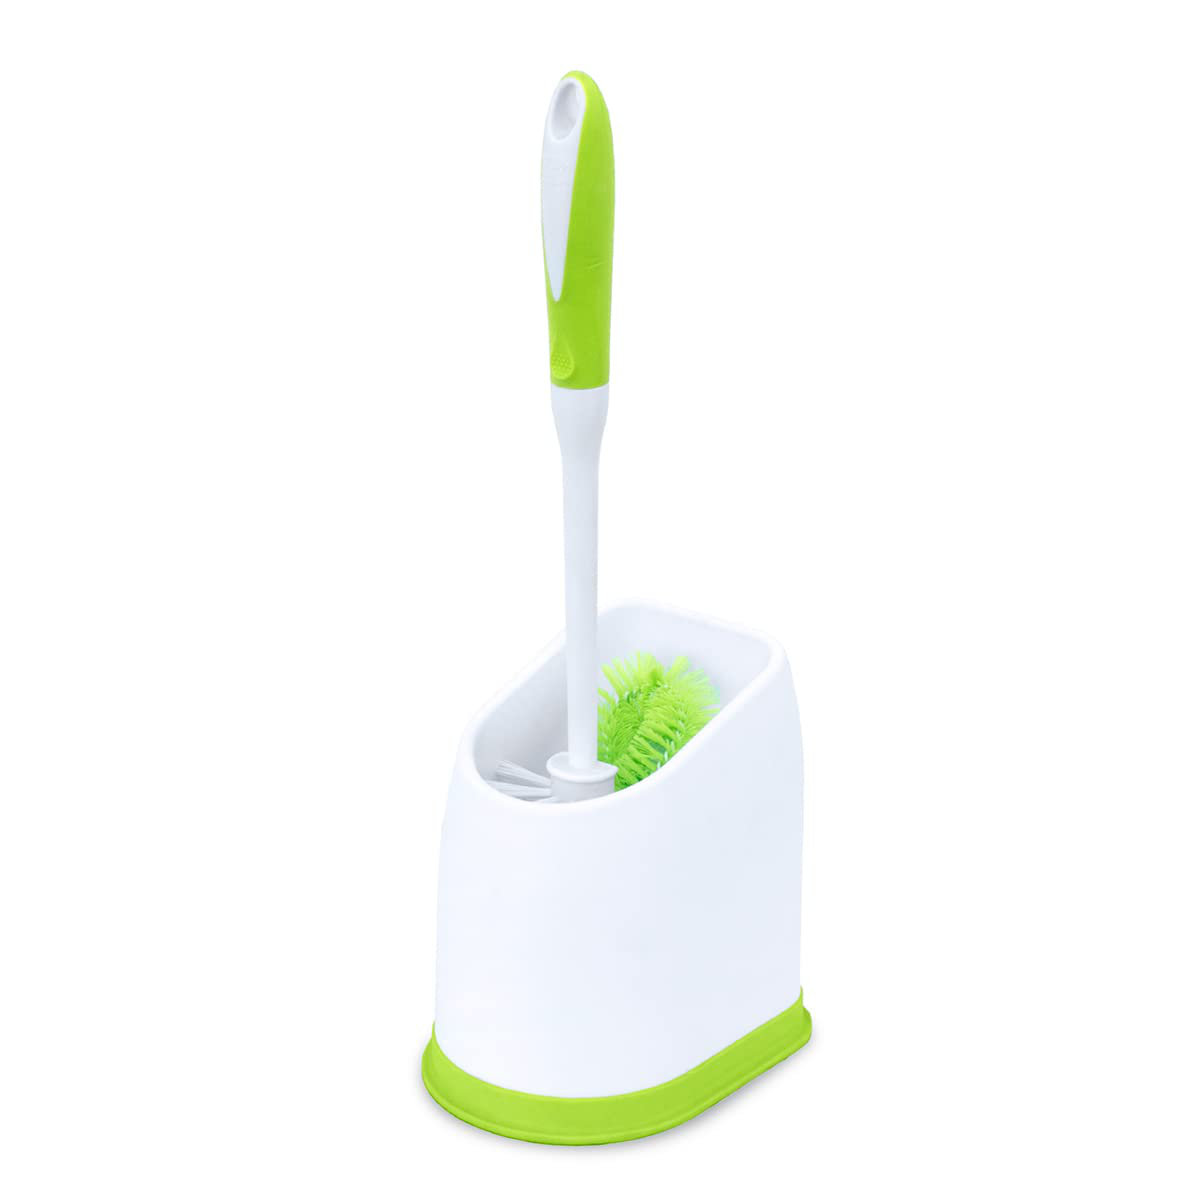 A Home Plastic Toilet Brush And Holder